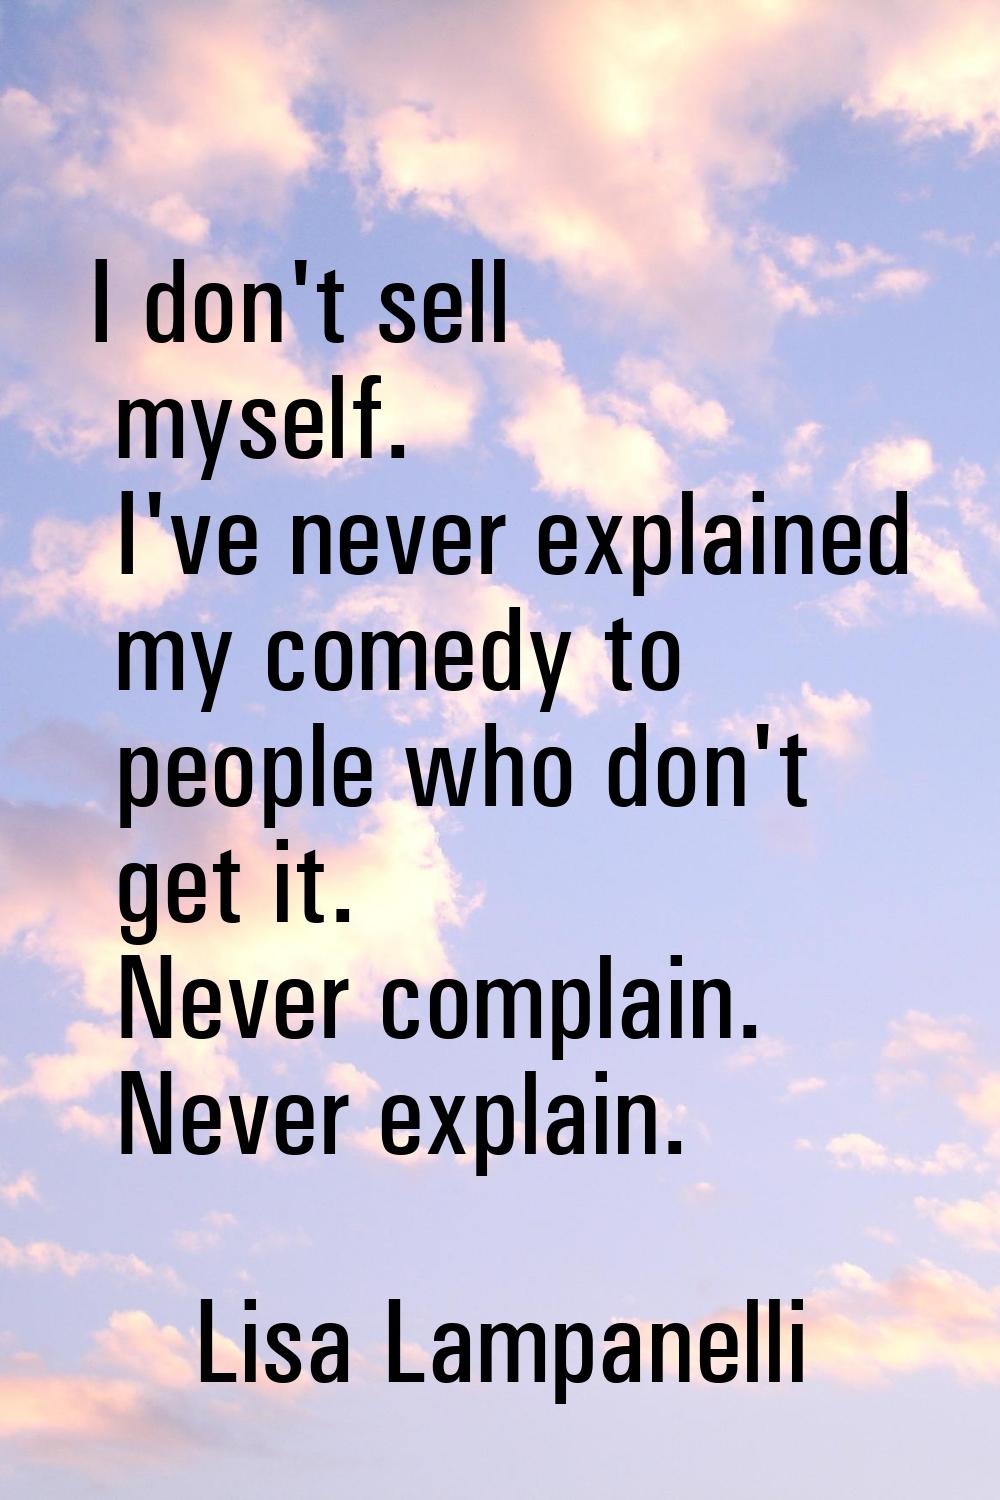 I don't sell myself. I've never explained my comedy to people who don't get it. Never complain. Nev